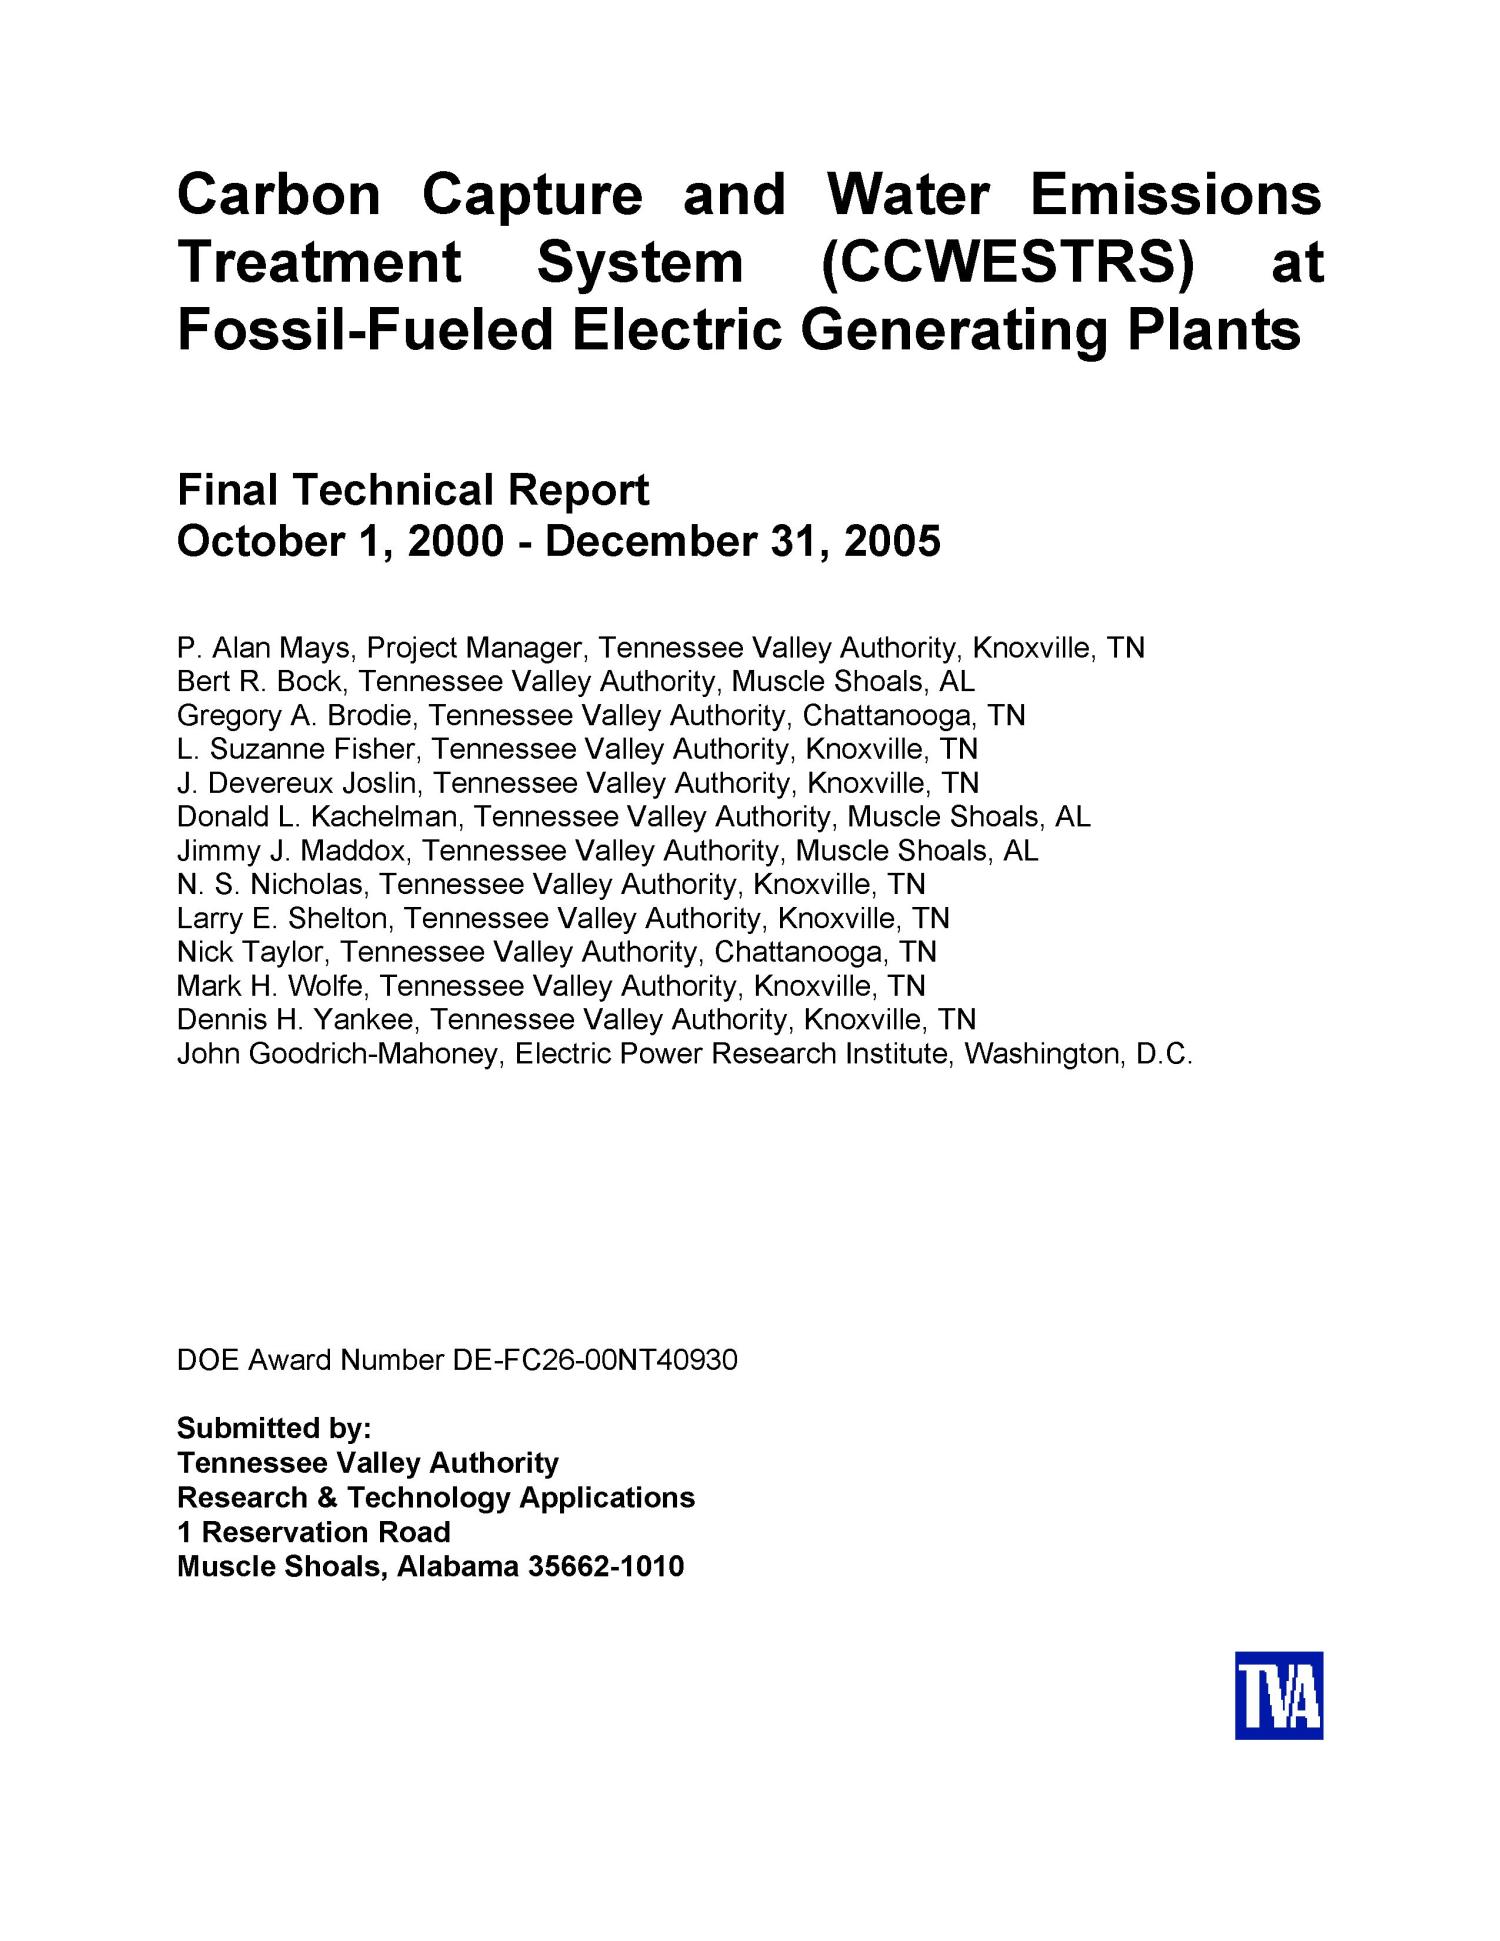 Carbon Capture and Water Emissions Treatment System (CCWESTRS) at Fossil-Fueled Electric Generating Plants
                                                
                                                    [Sequence #]: 1 of 191
                                                